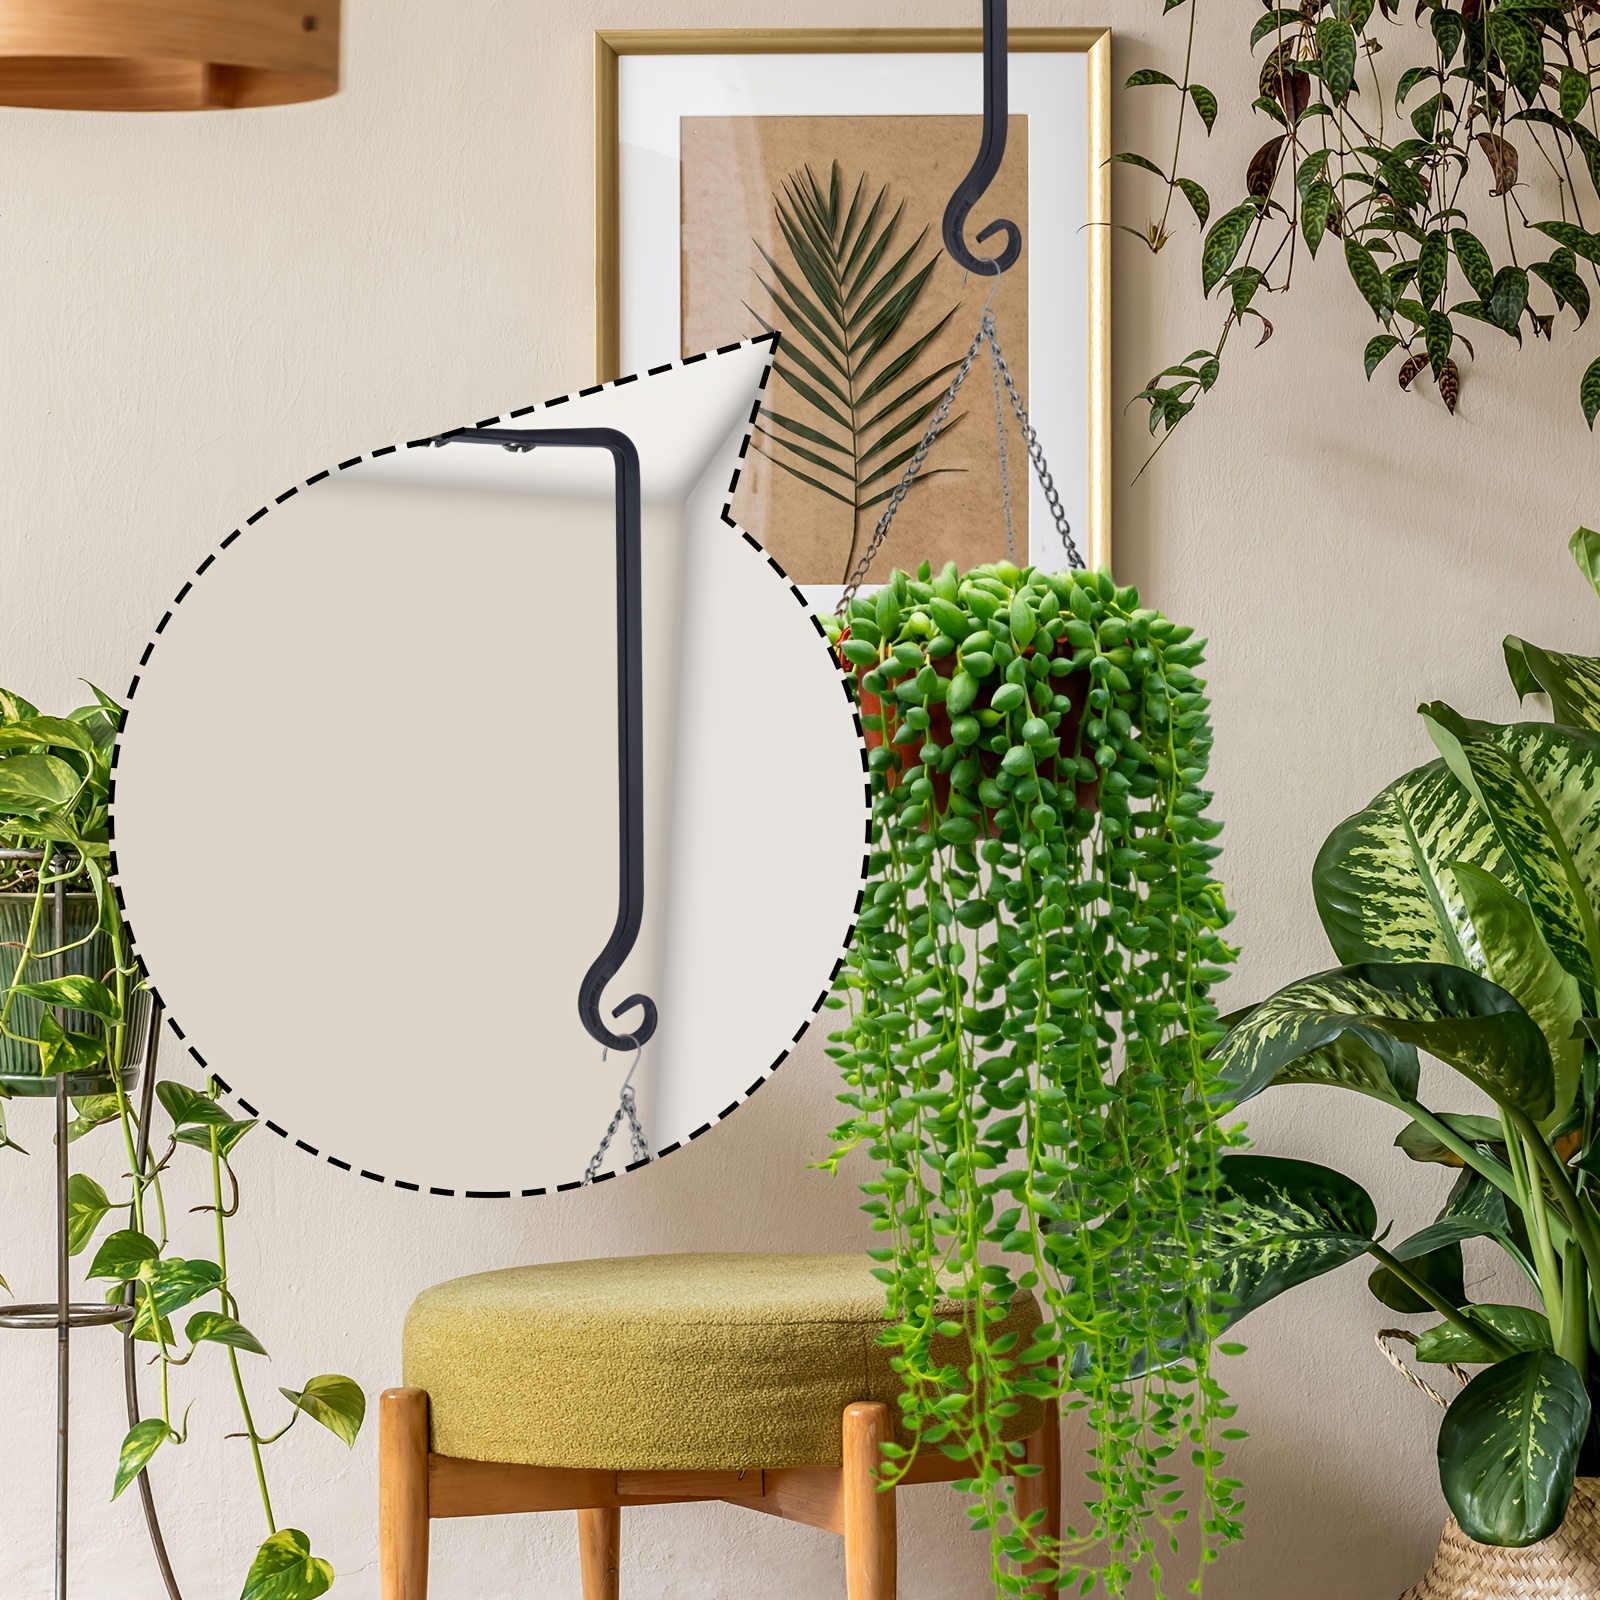 2pcs/4pcs Wall Hooks Are Used To Hang Plant Supports For The Decoration Of  Bird Feeders, Flower Pots, Lanterns And Wind Chimes (10 Inches)